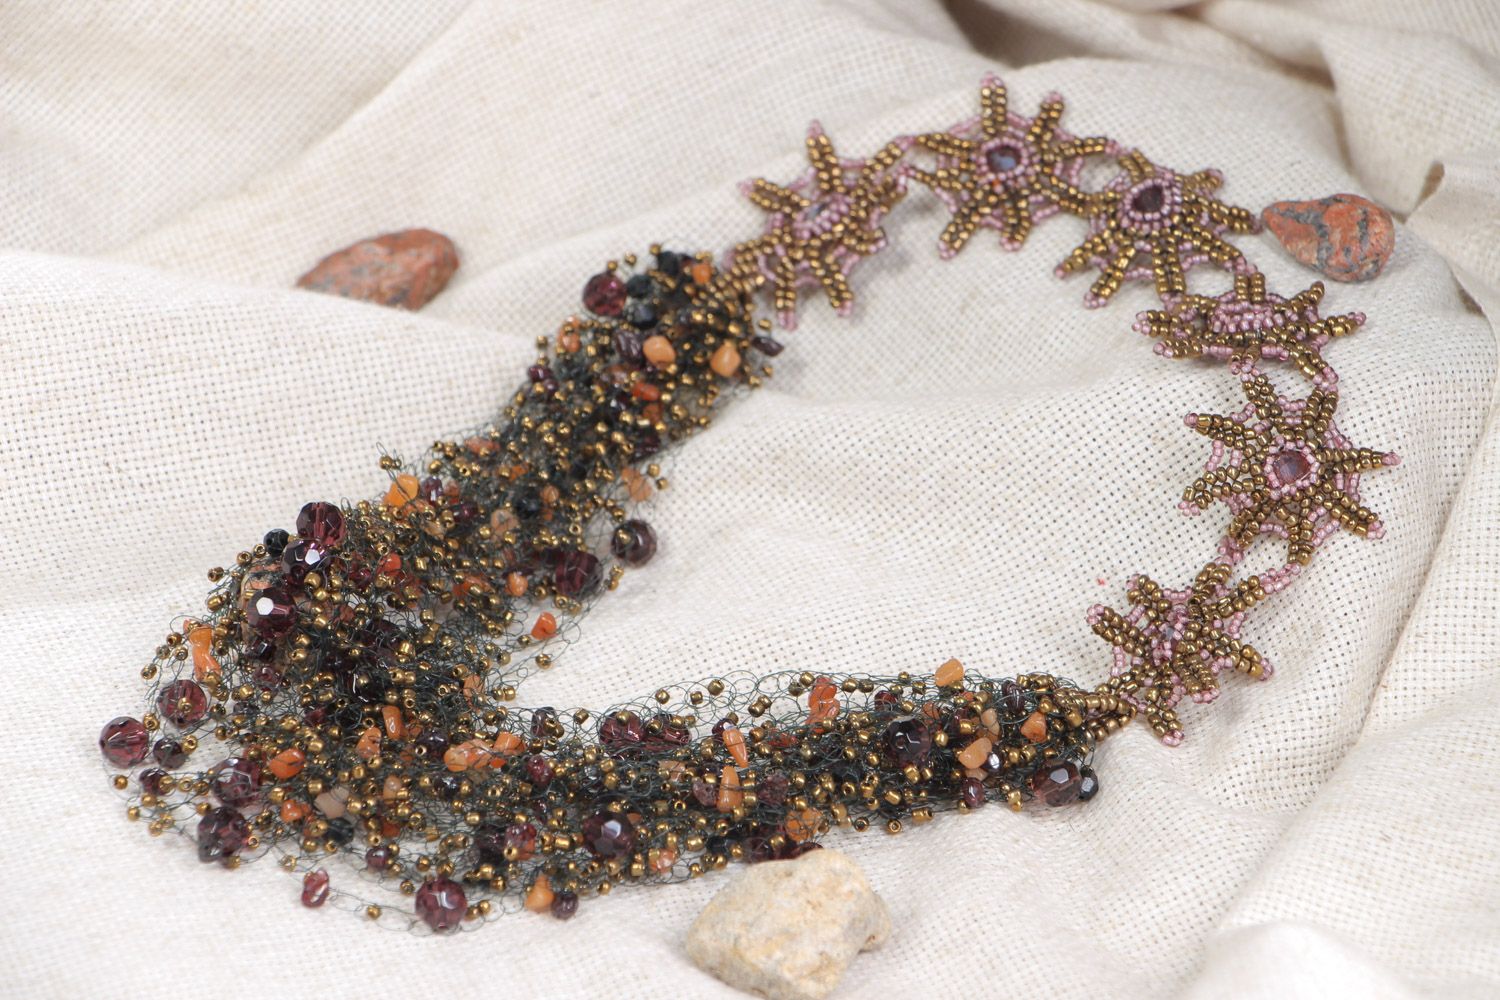 Handmade volume festive necklace woven of brown beads and natural stones photo 1